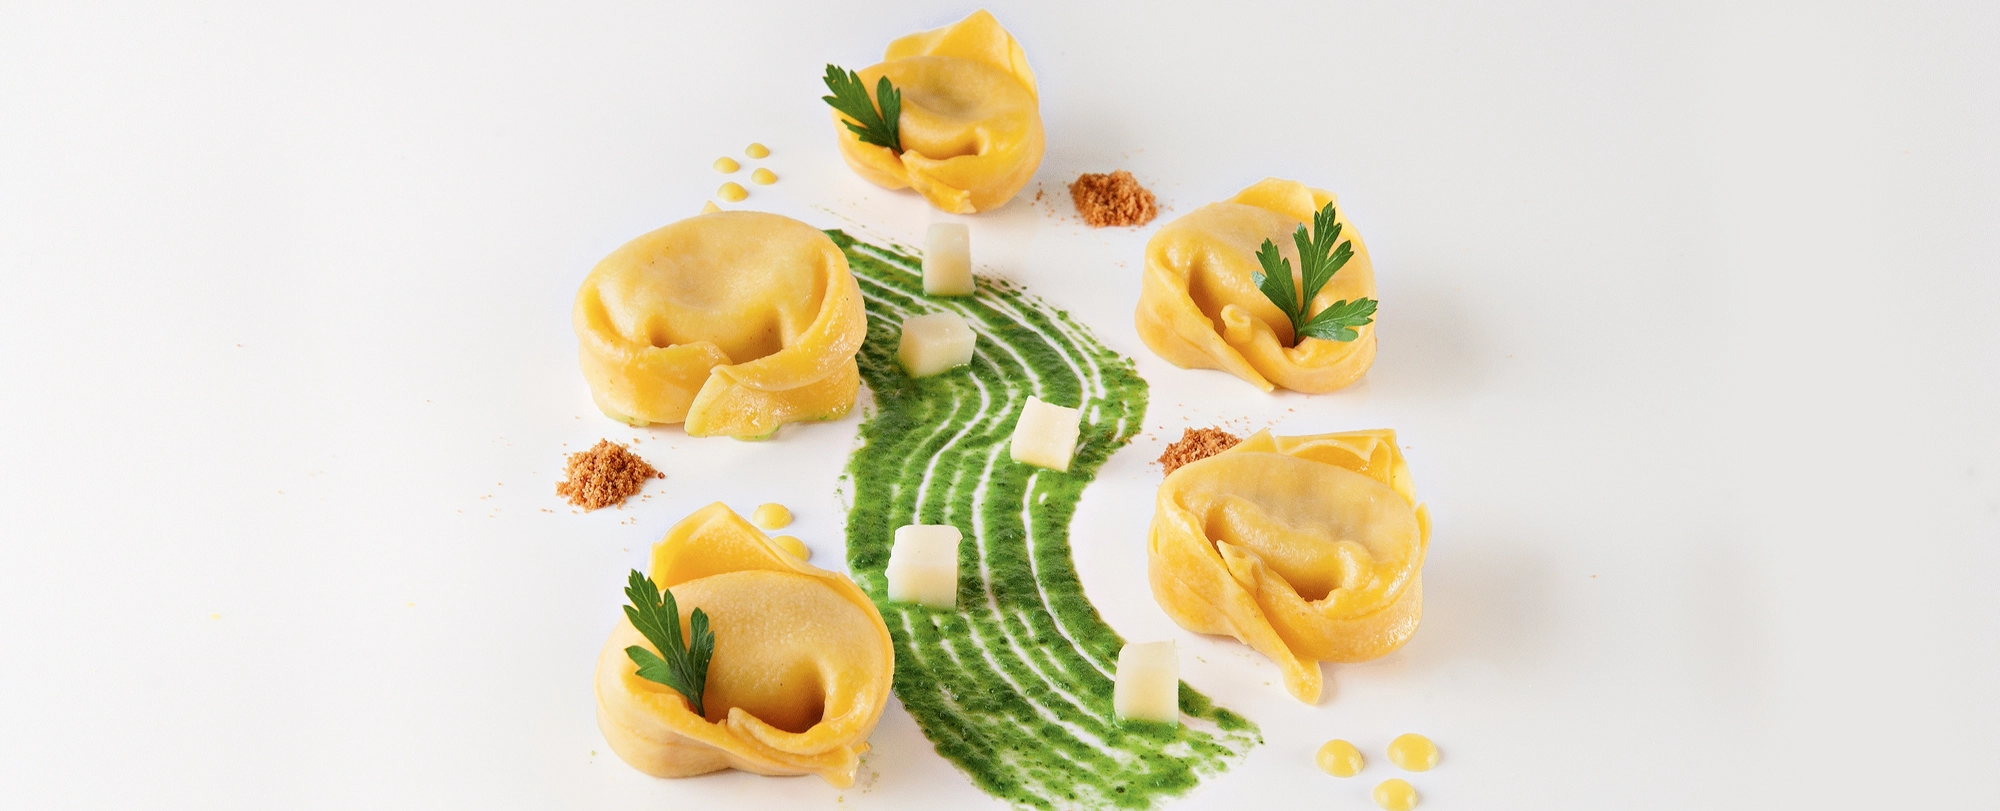 Tortelloni-with-parsley-with-bottle-buttermilk-vellied-potato-and-parsley-sauce-